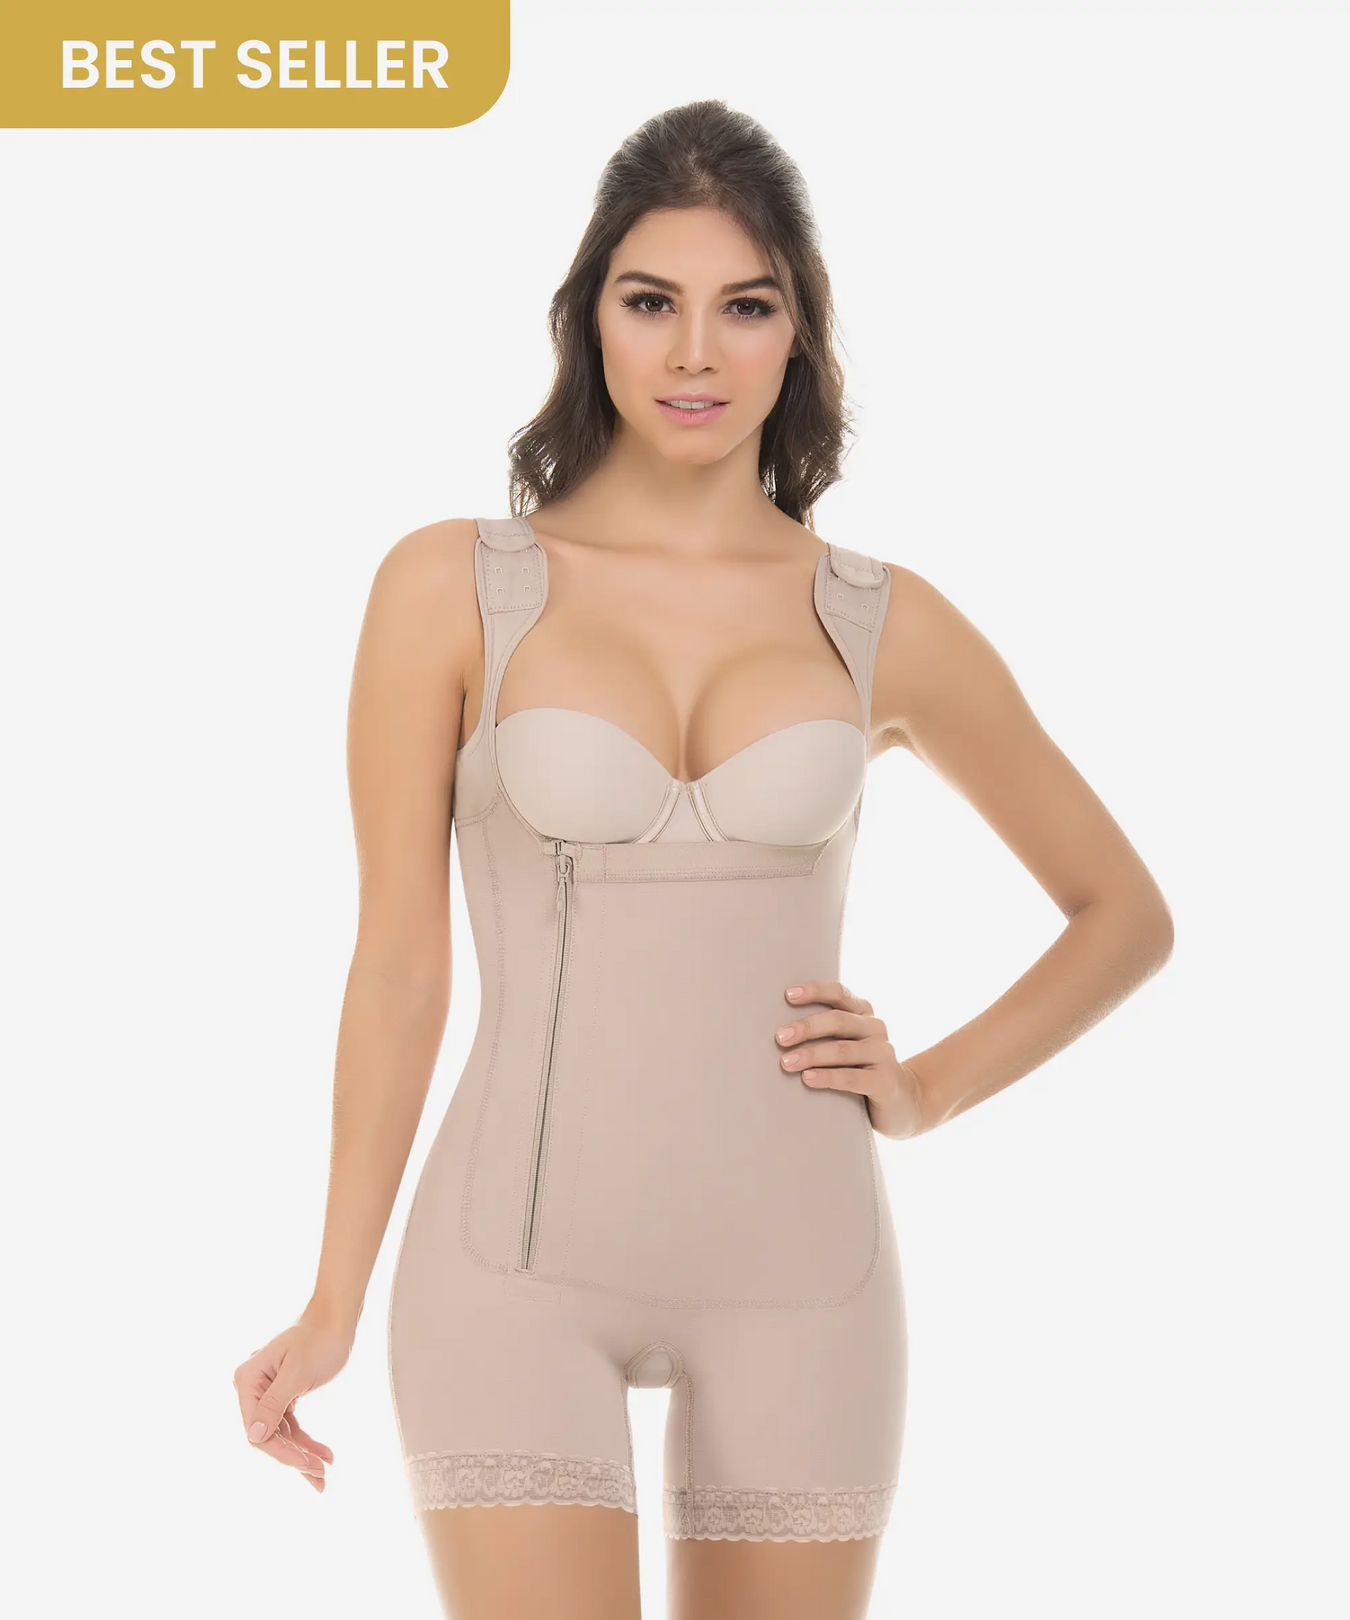 Shapewear for hourglass body shapes!